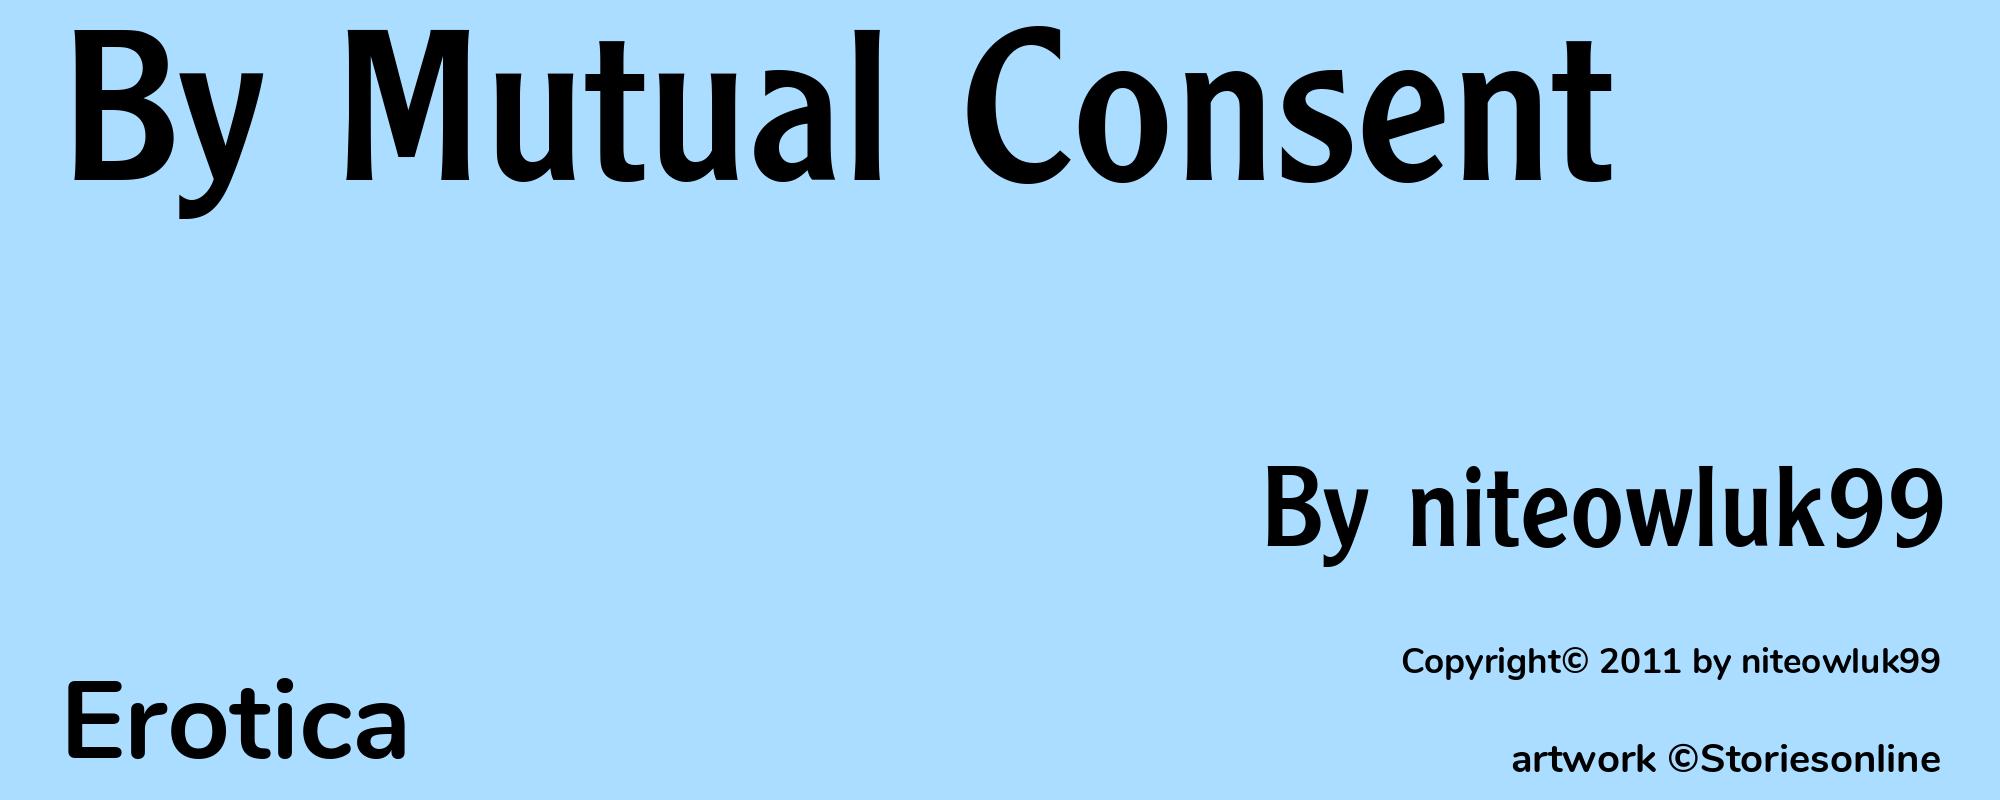 By Mutual Consent - Cover